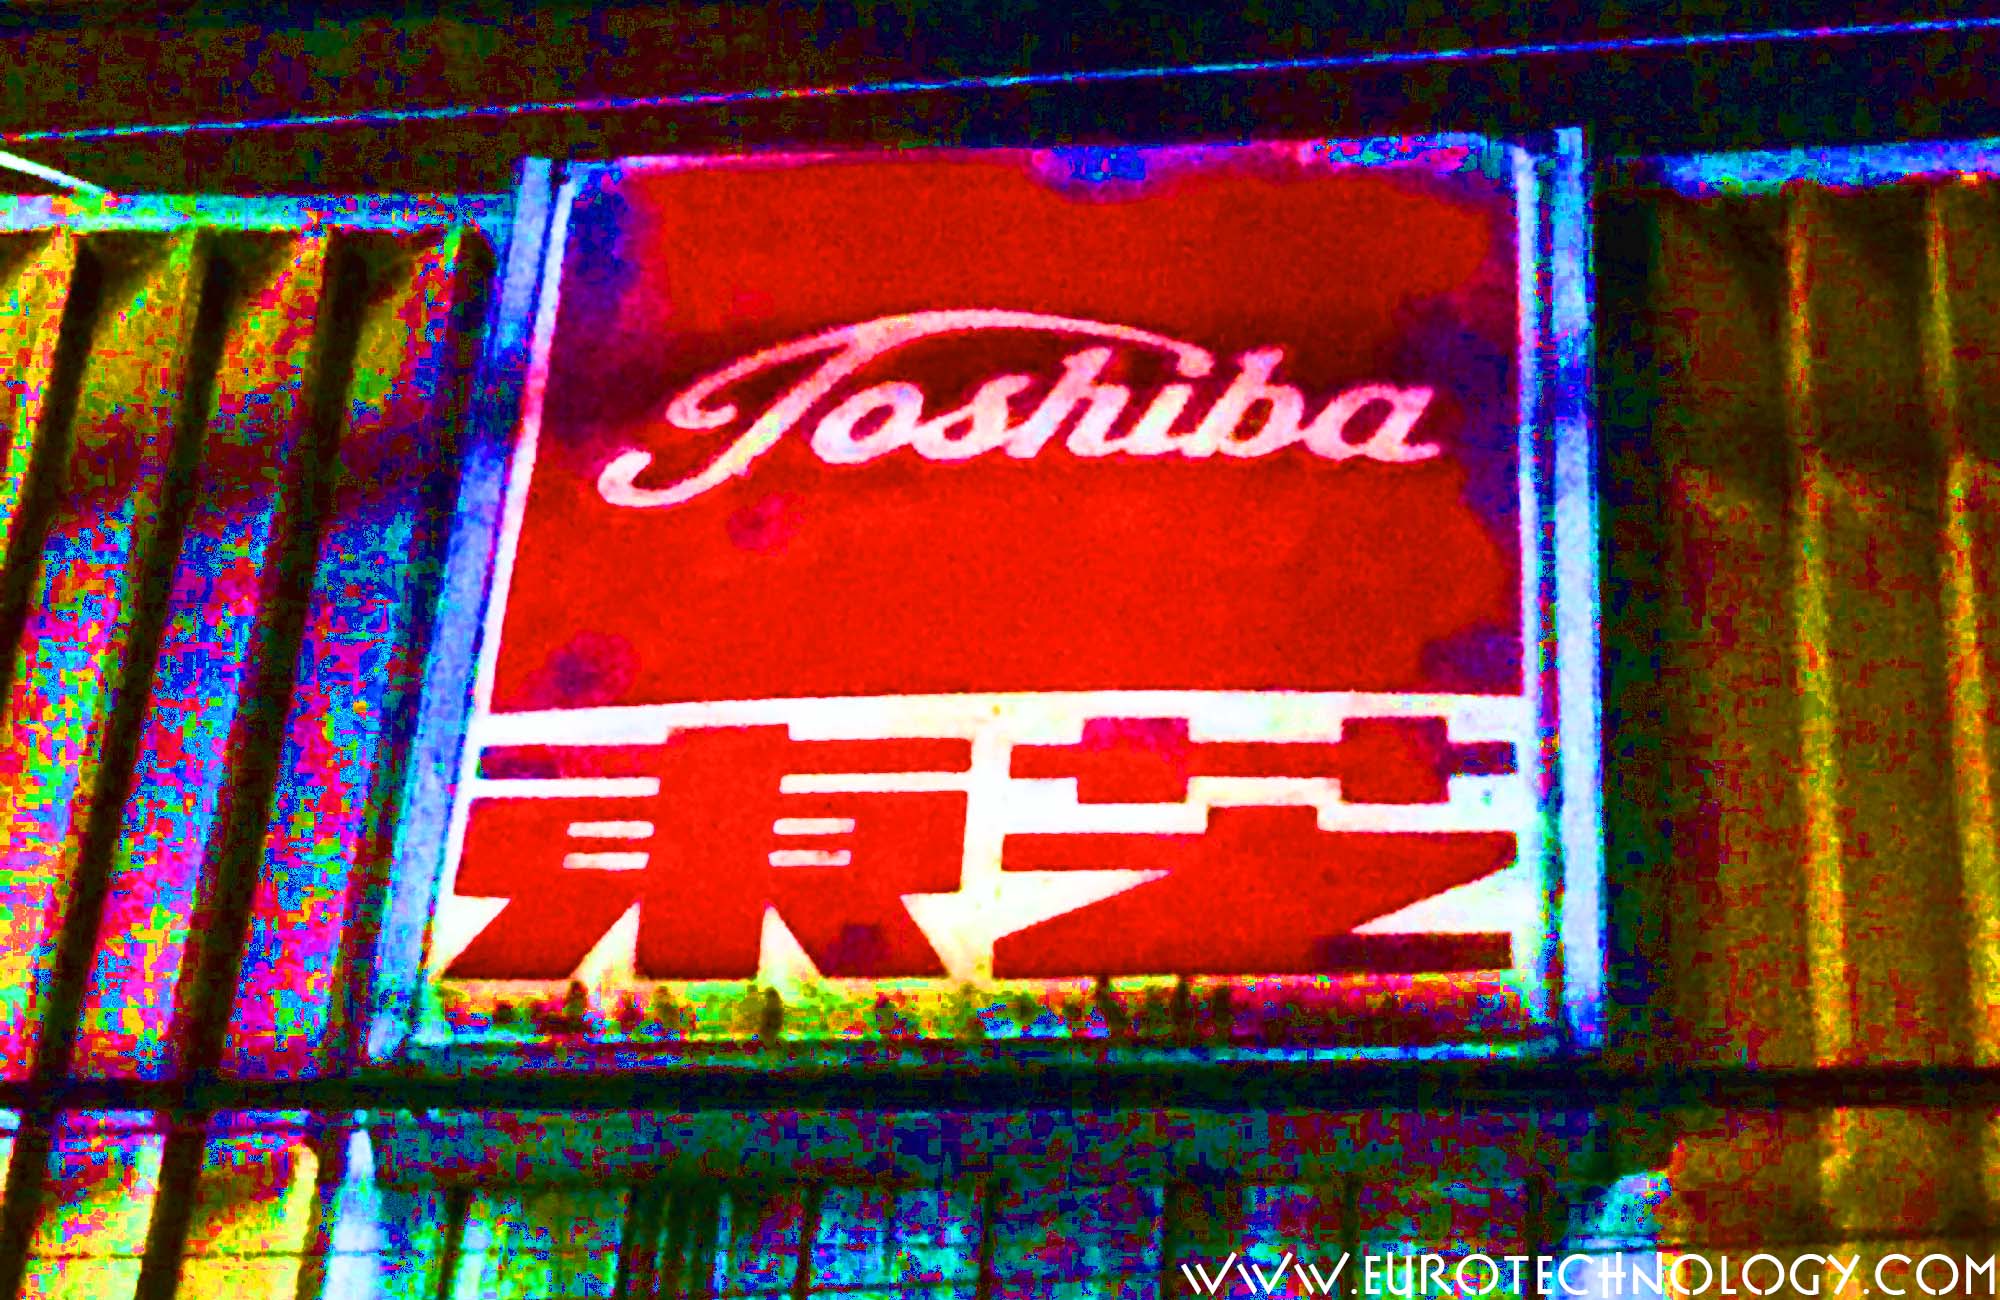 Toshiba nuclear write-off. BBC interview about Toshiba’s latest nuclear industry write-offs